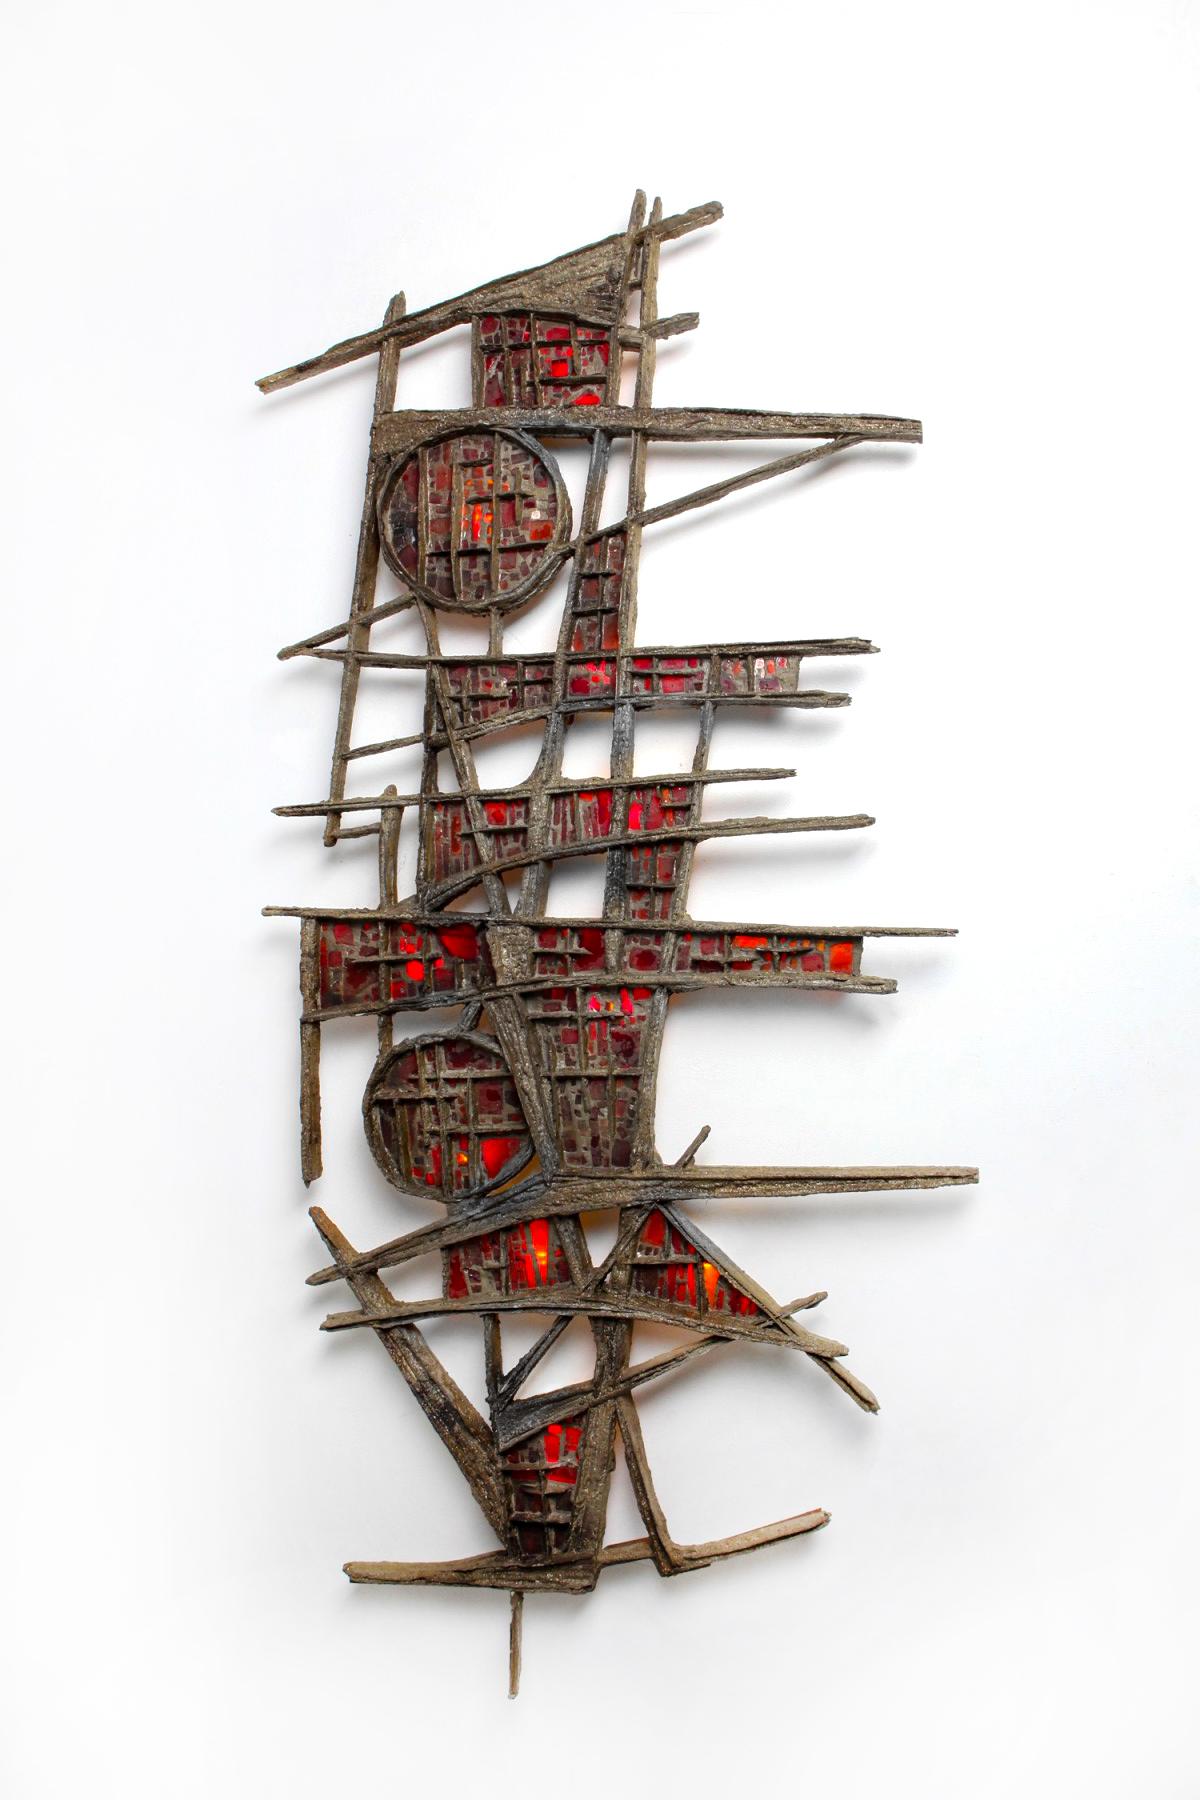 Pia Manu Brutalist Illuminated Wall Sculpture in Steel & Red Stained Glass 1970s For Sale 3